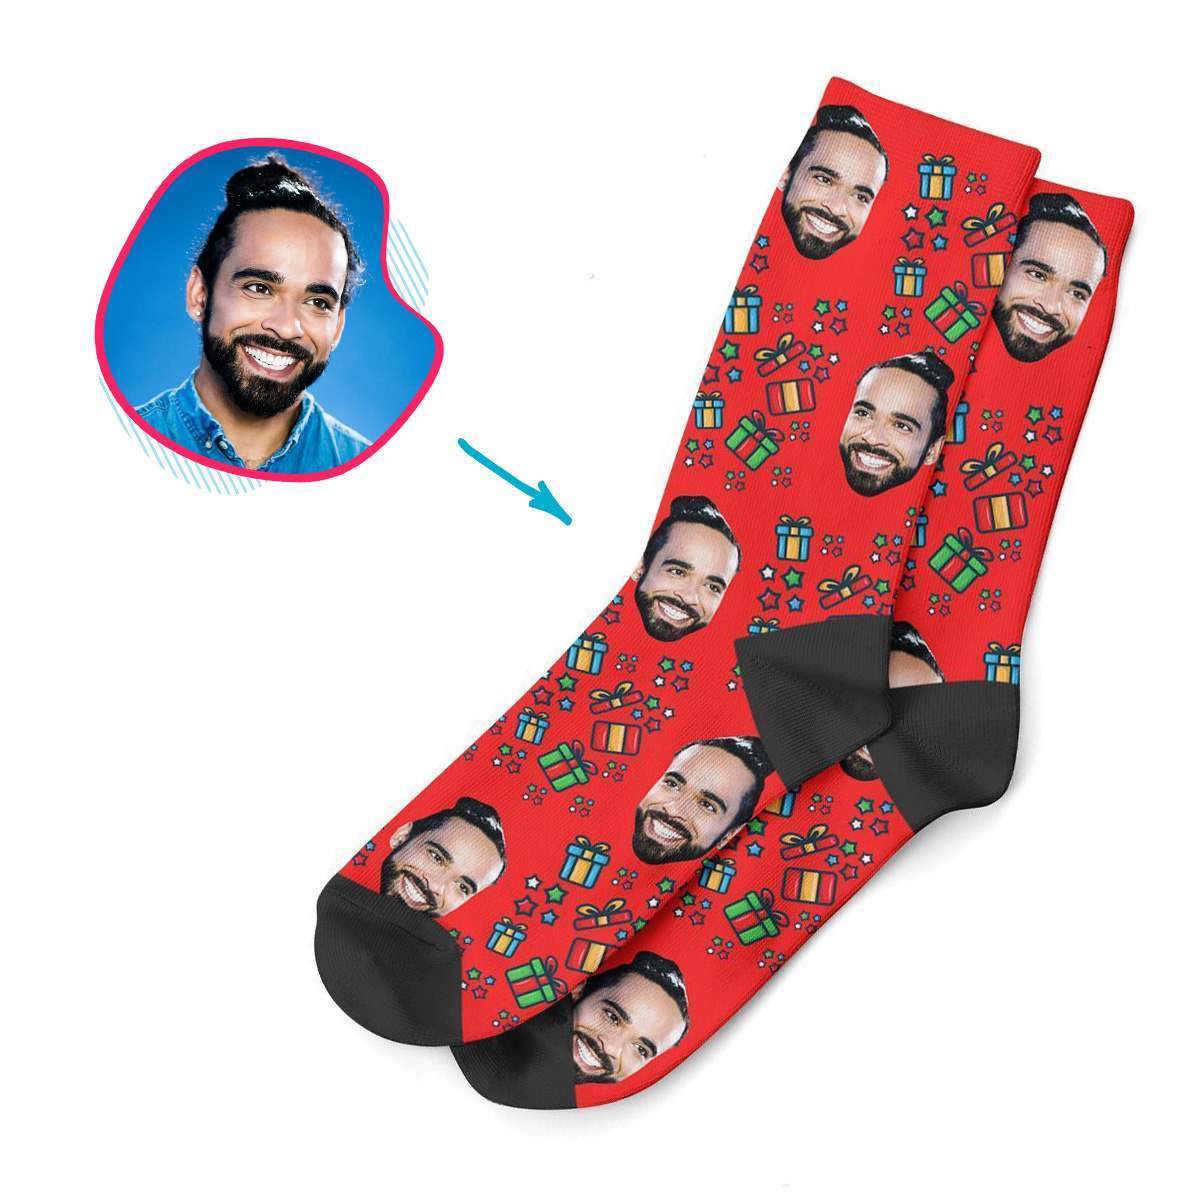 red Gift Box socks personalized with photo of face printed on them